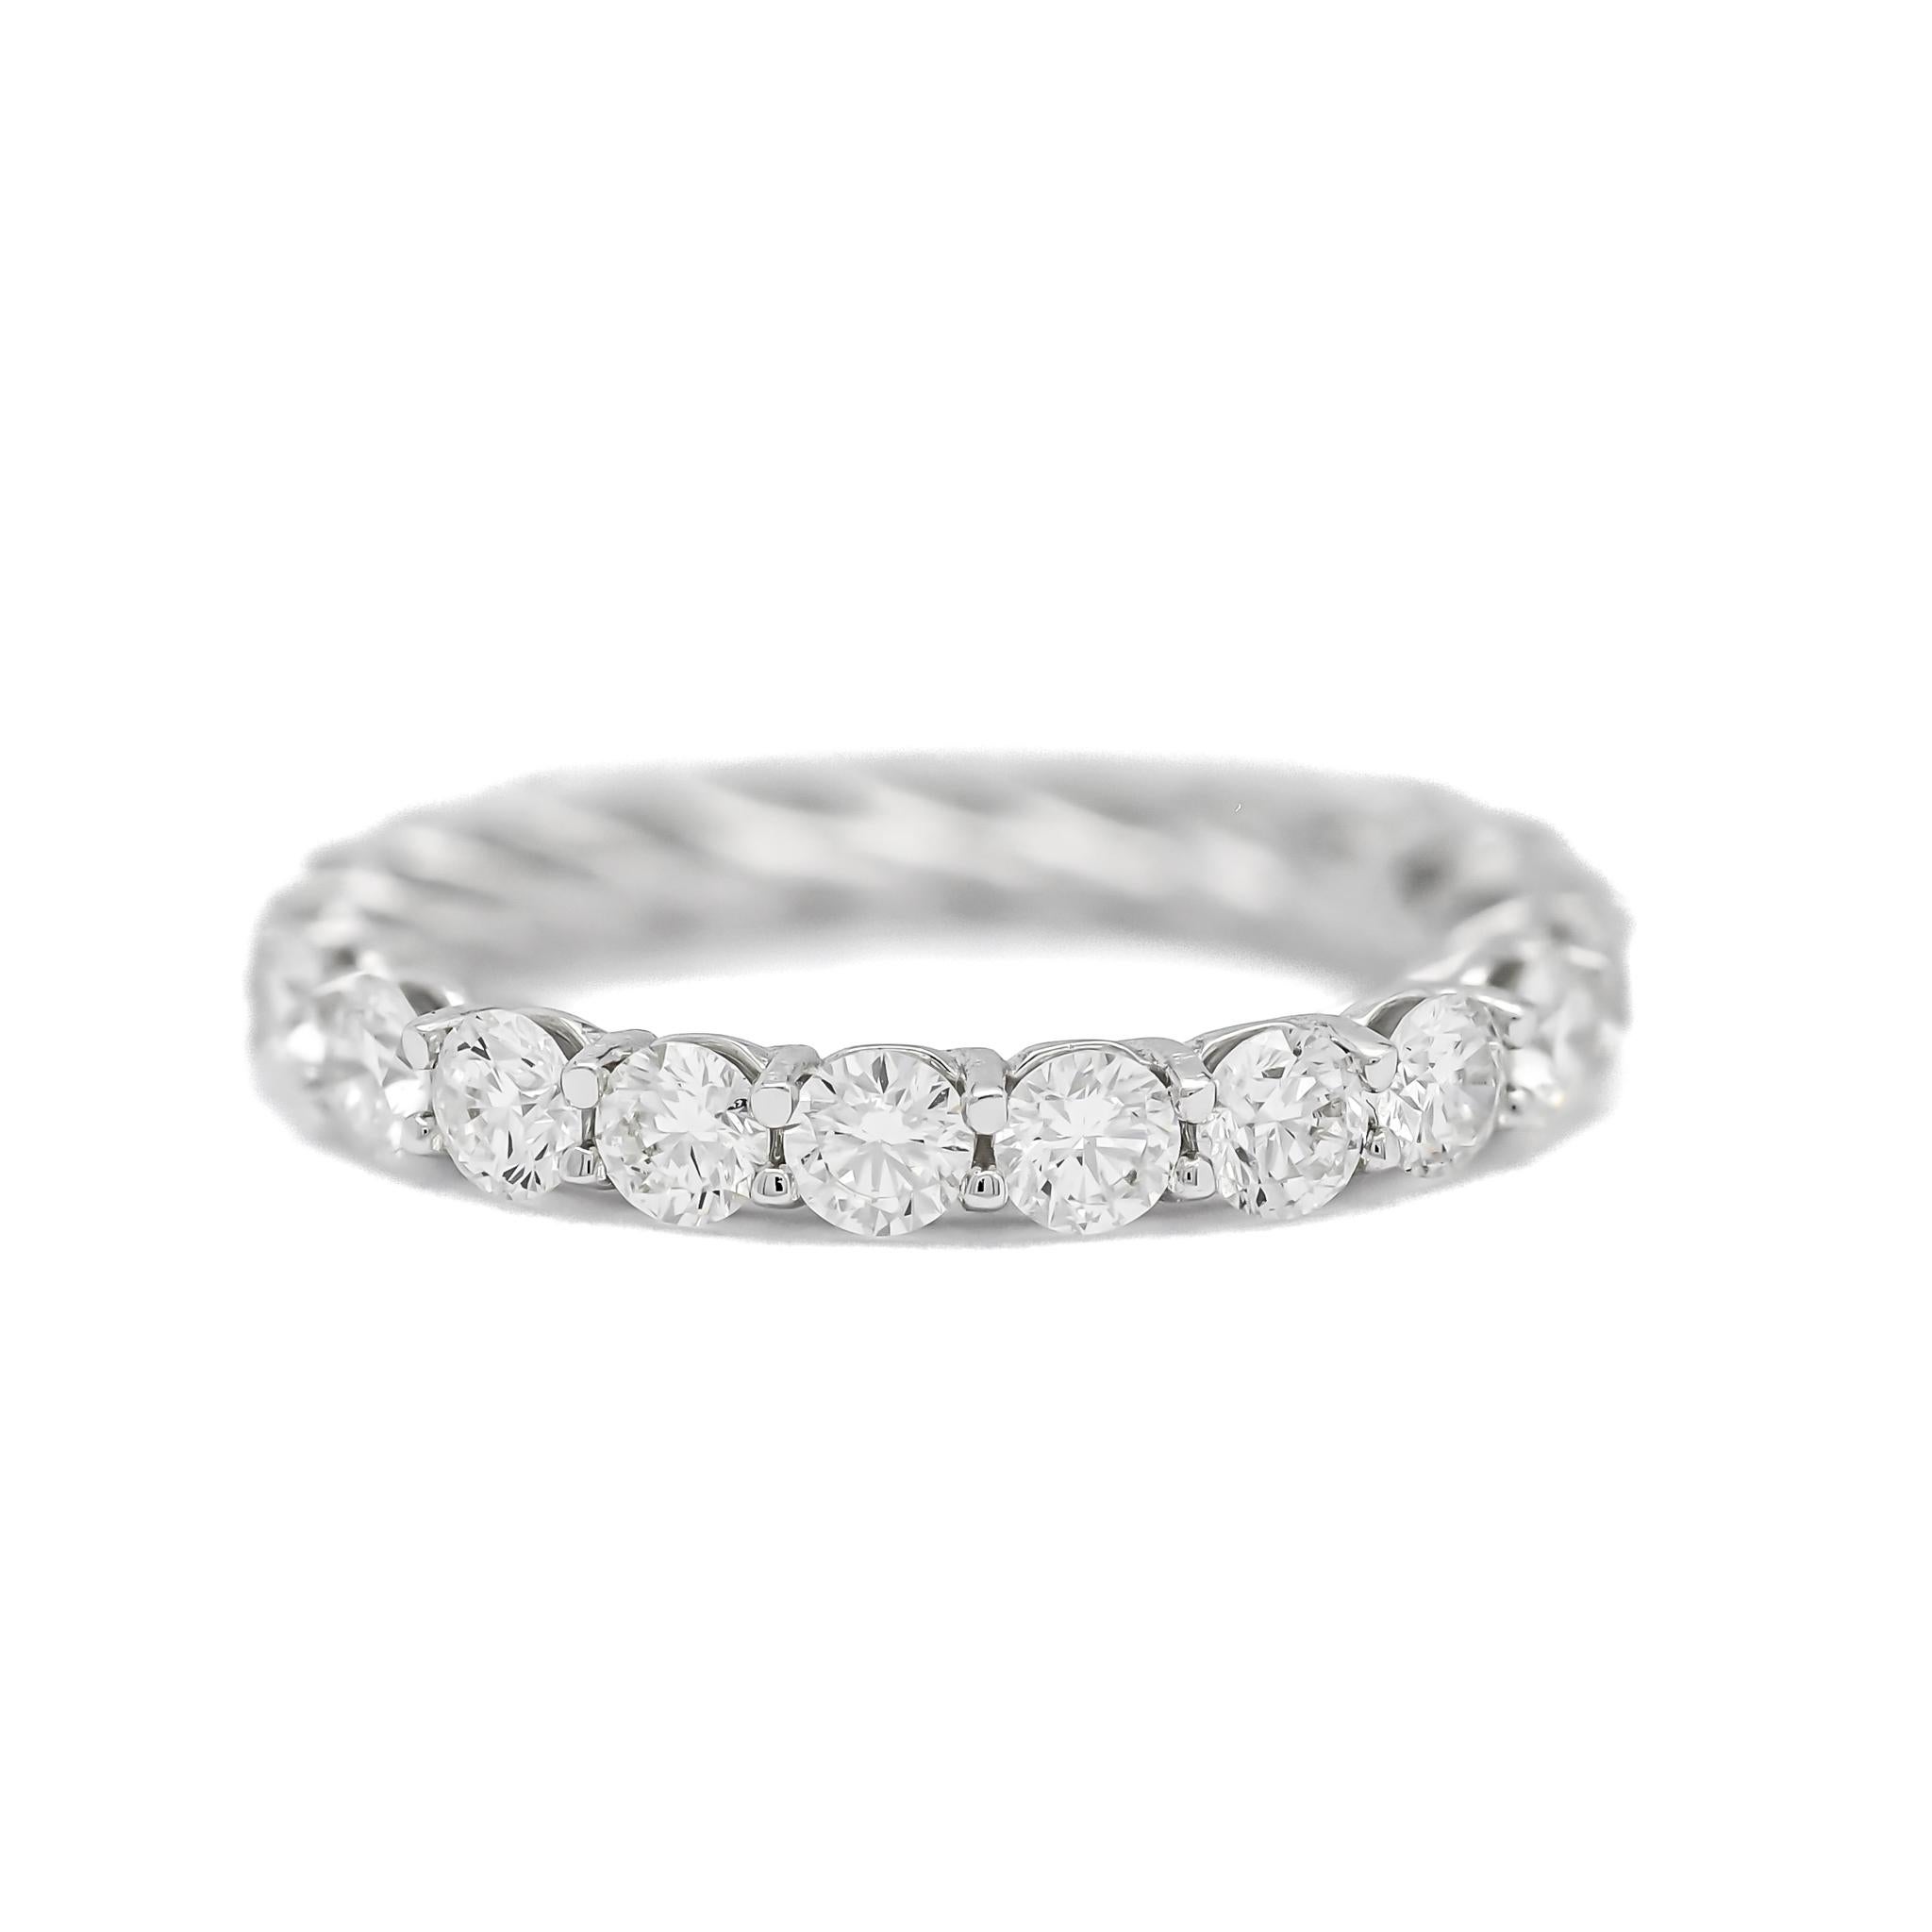 For Sale:  3.15 Carat Full Eternity Natural Diamond Ring in White Gold with 4 Prongs 5